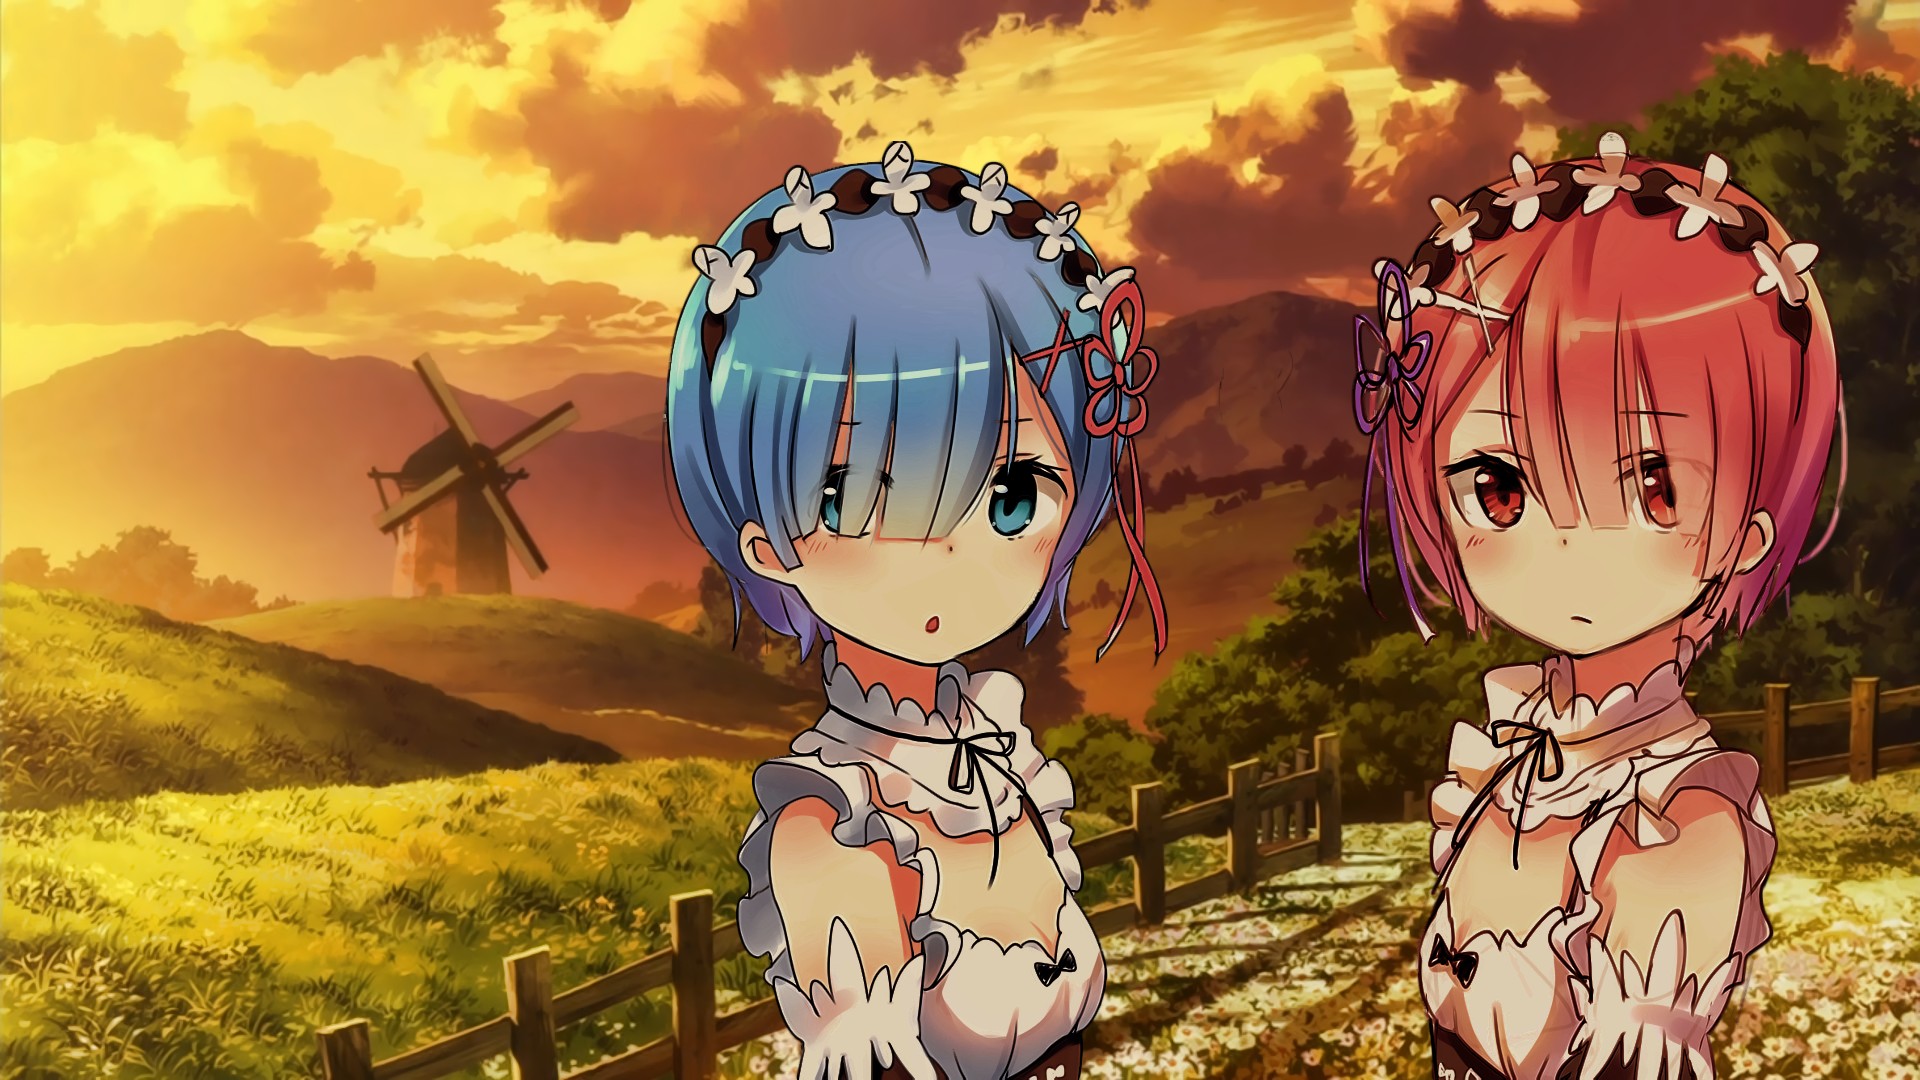 Rem Re Zero wallpaper ·① Download free cool HD backgrounds for desktop and mobile devices in any